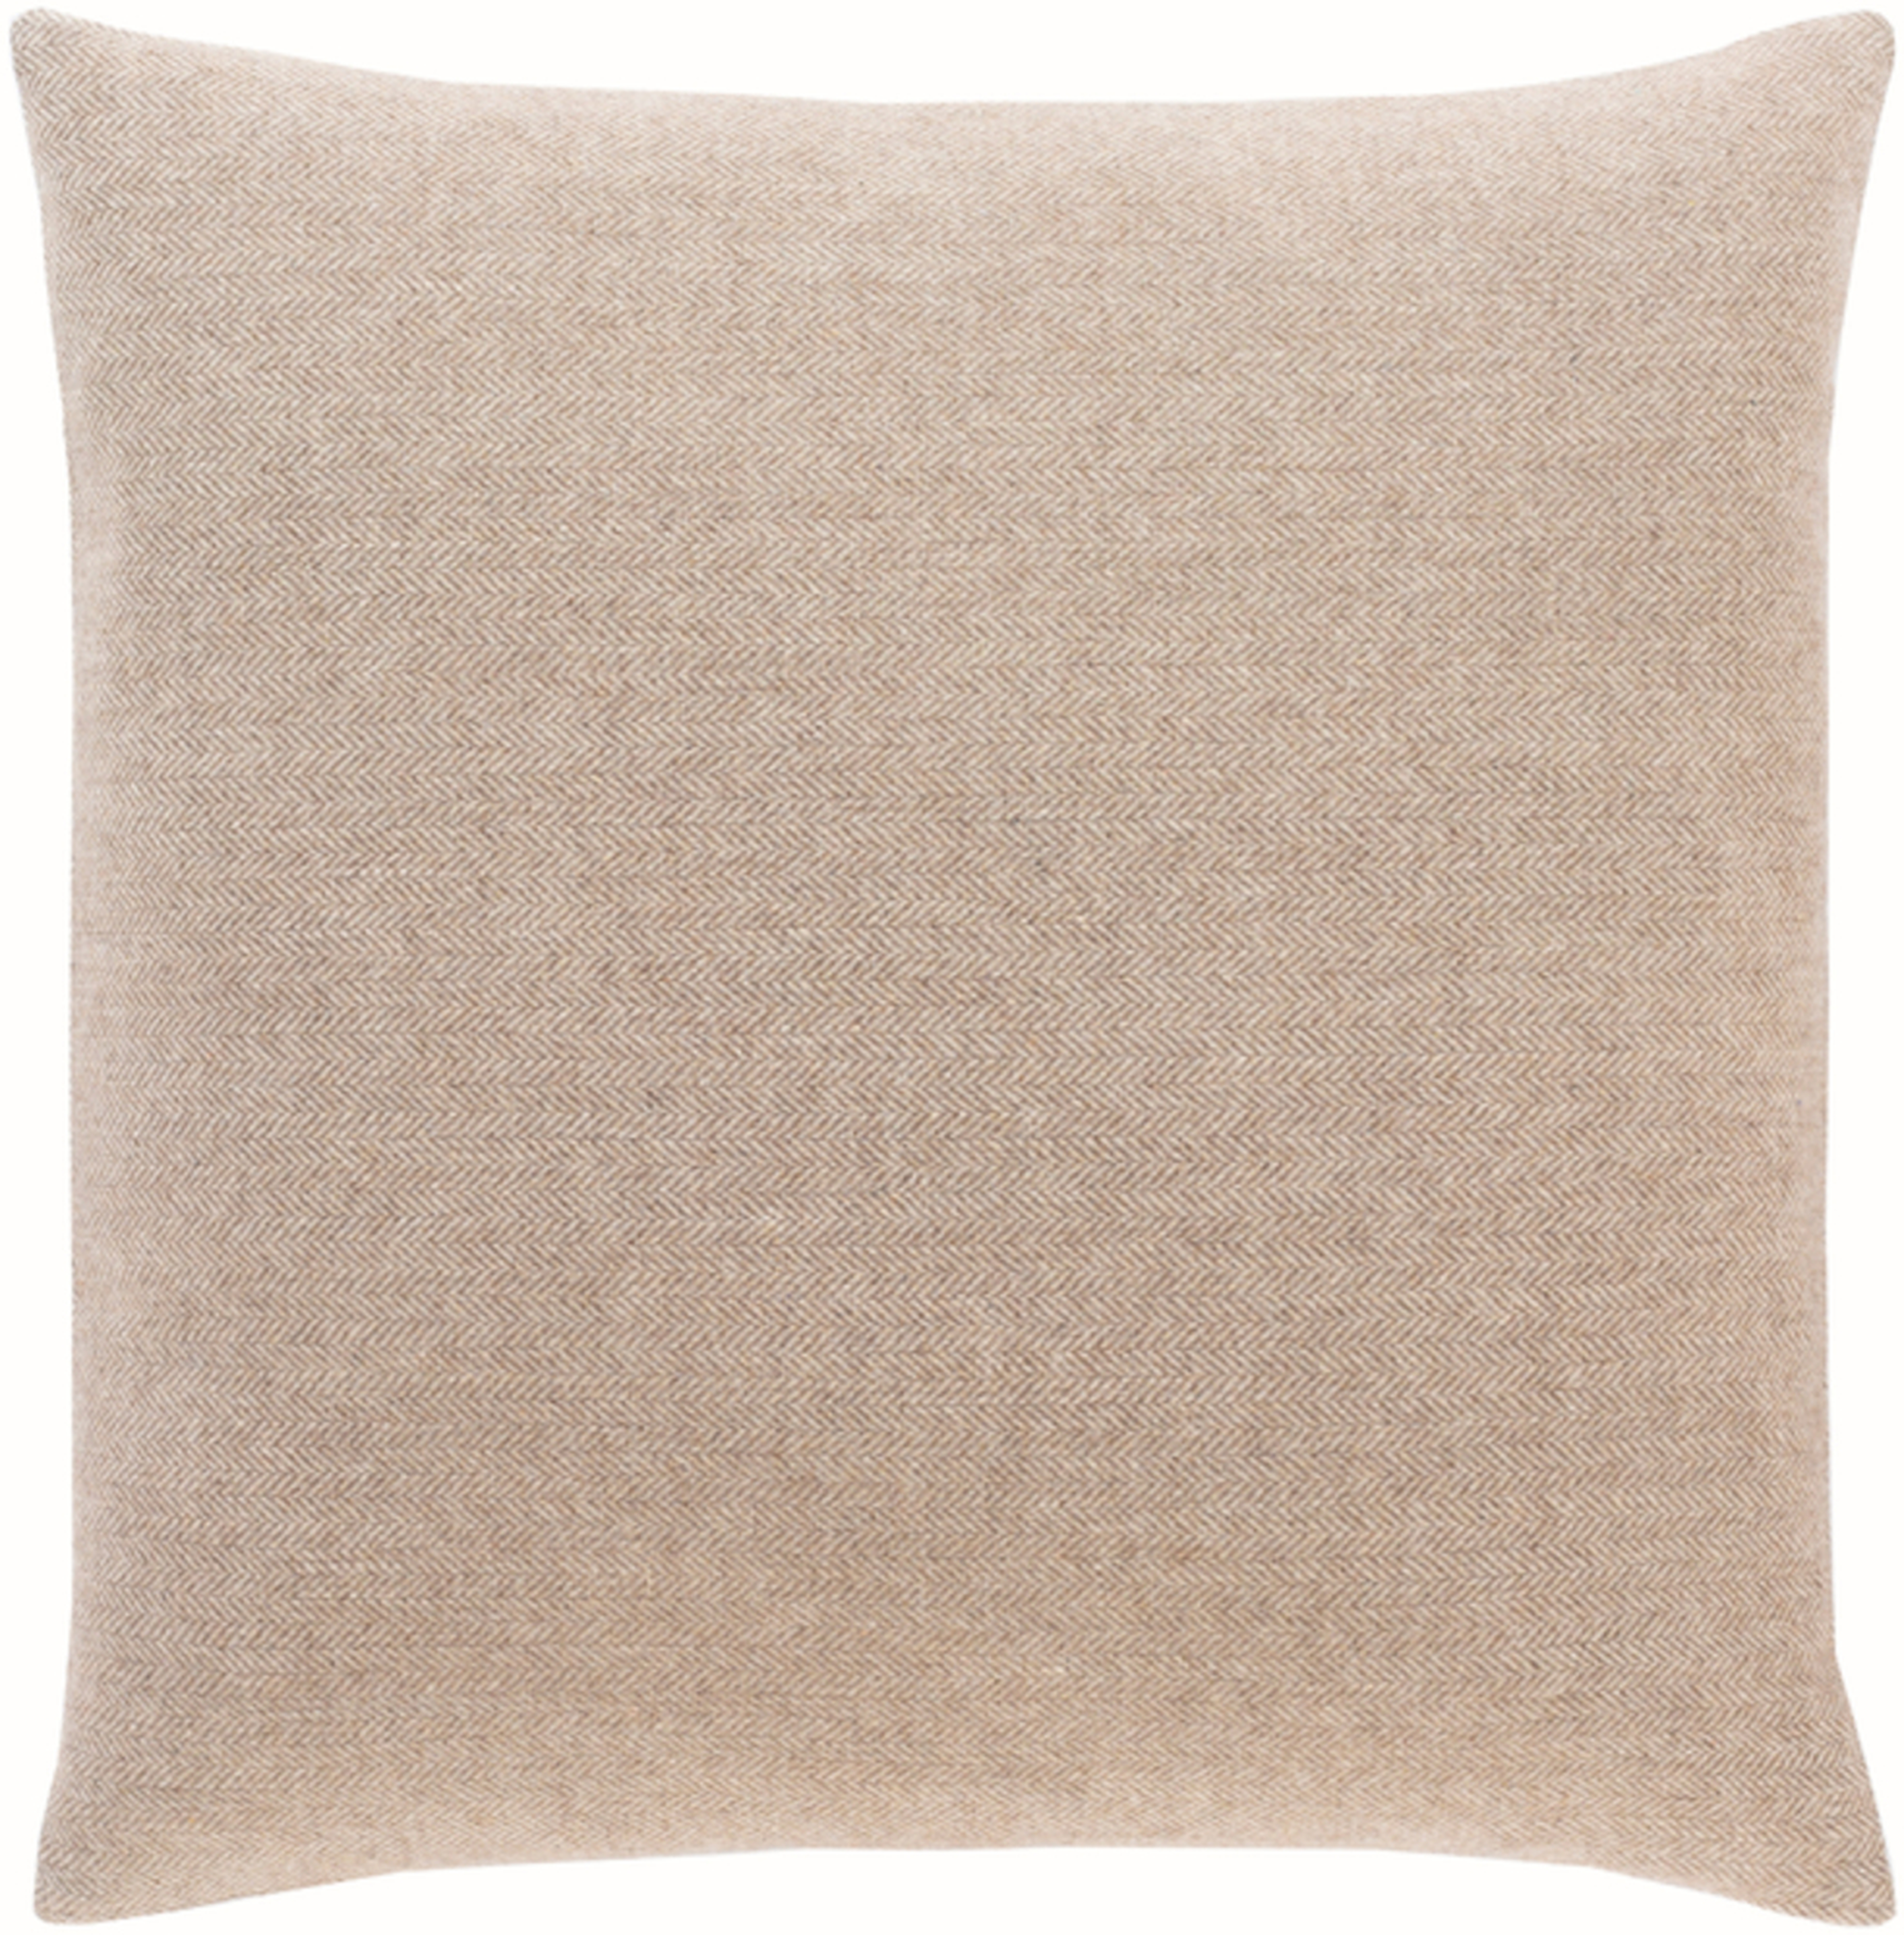 Brenley Pillow Cover,20''H x 20'' W - Cove Goods